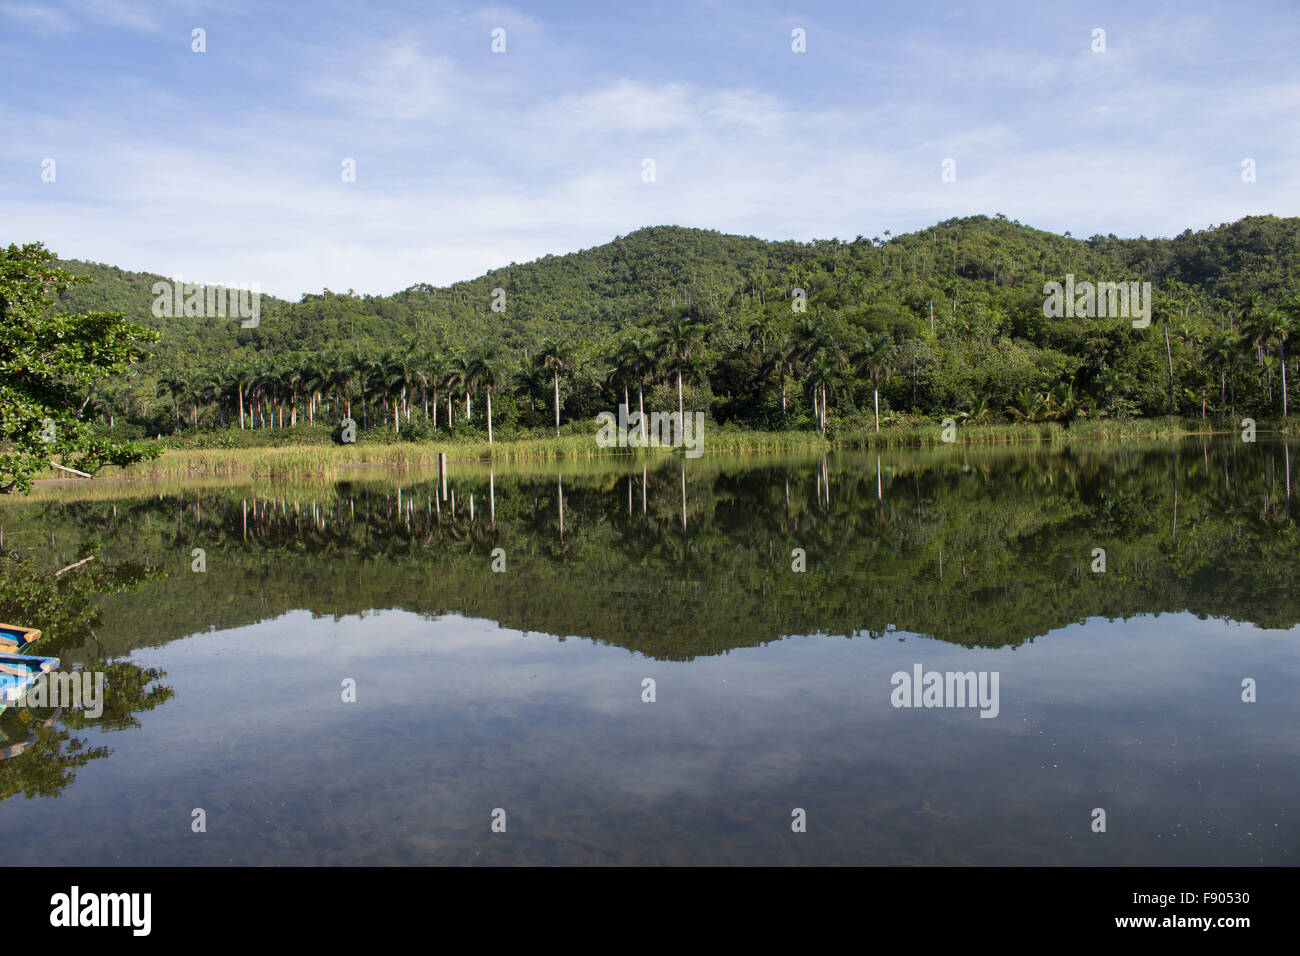 The trees are mirroring themselves in the lake Stock Photo